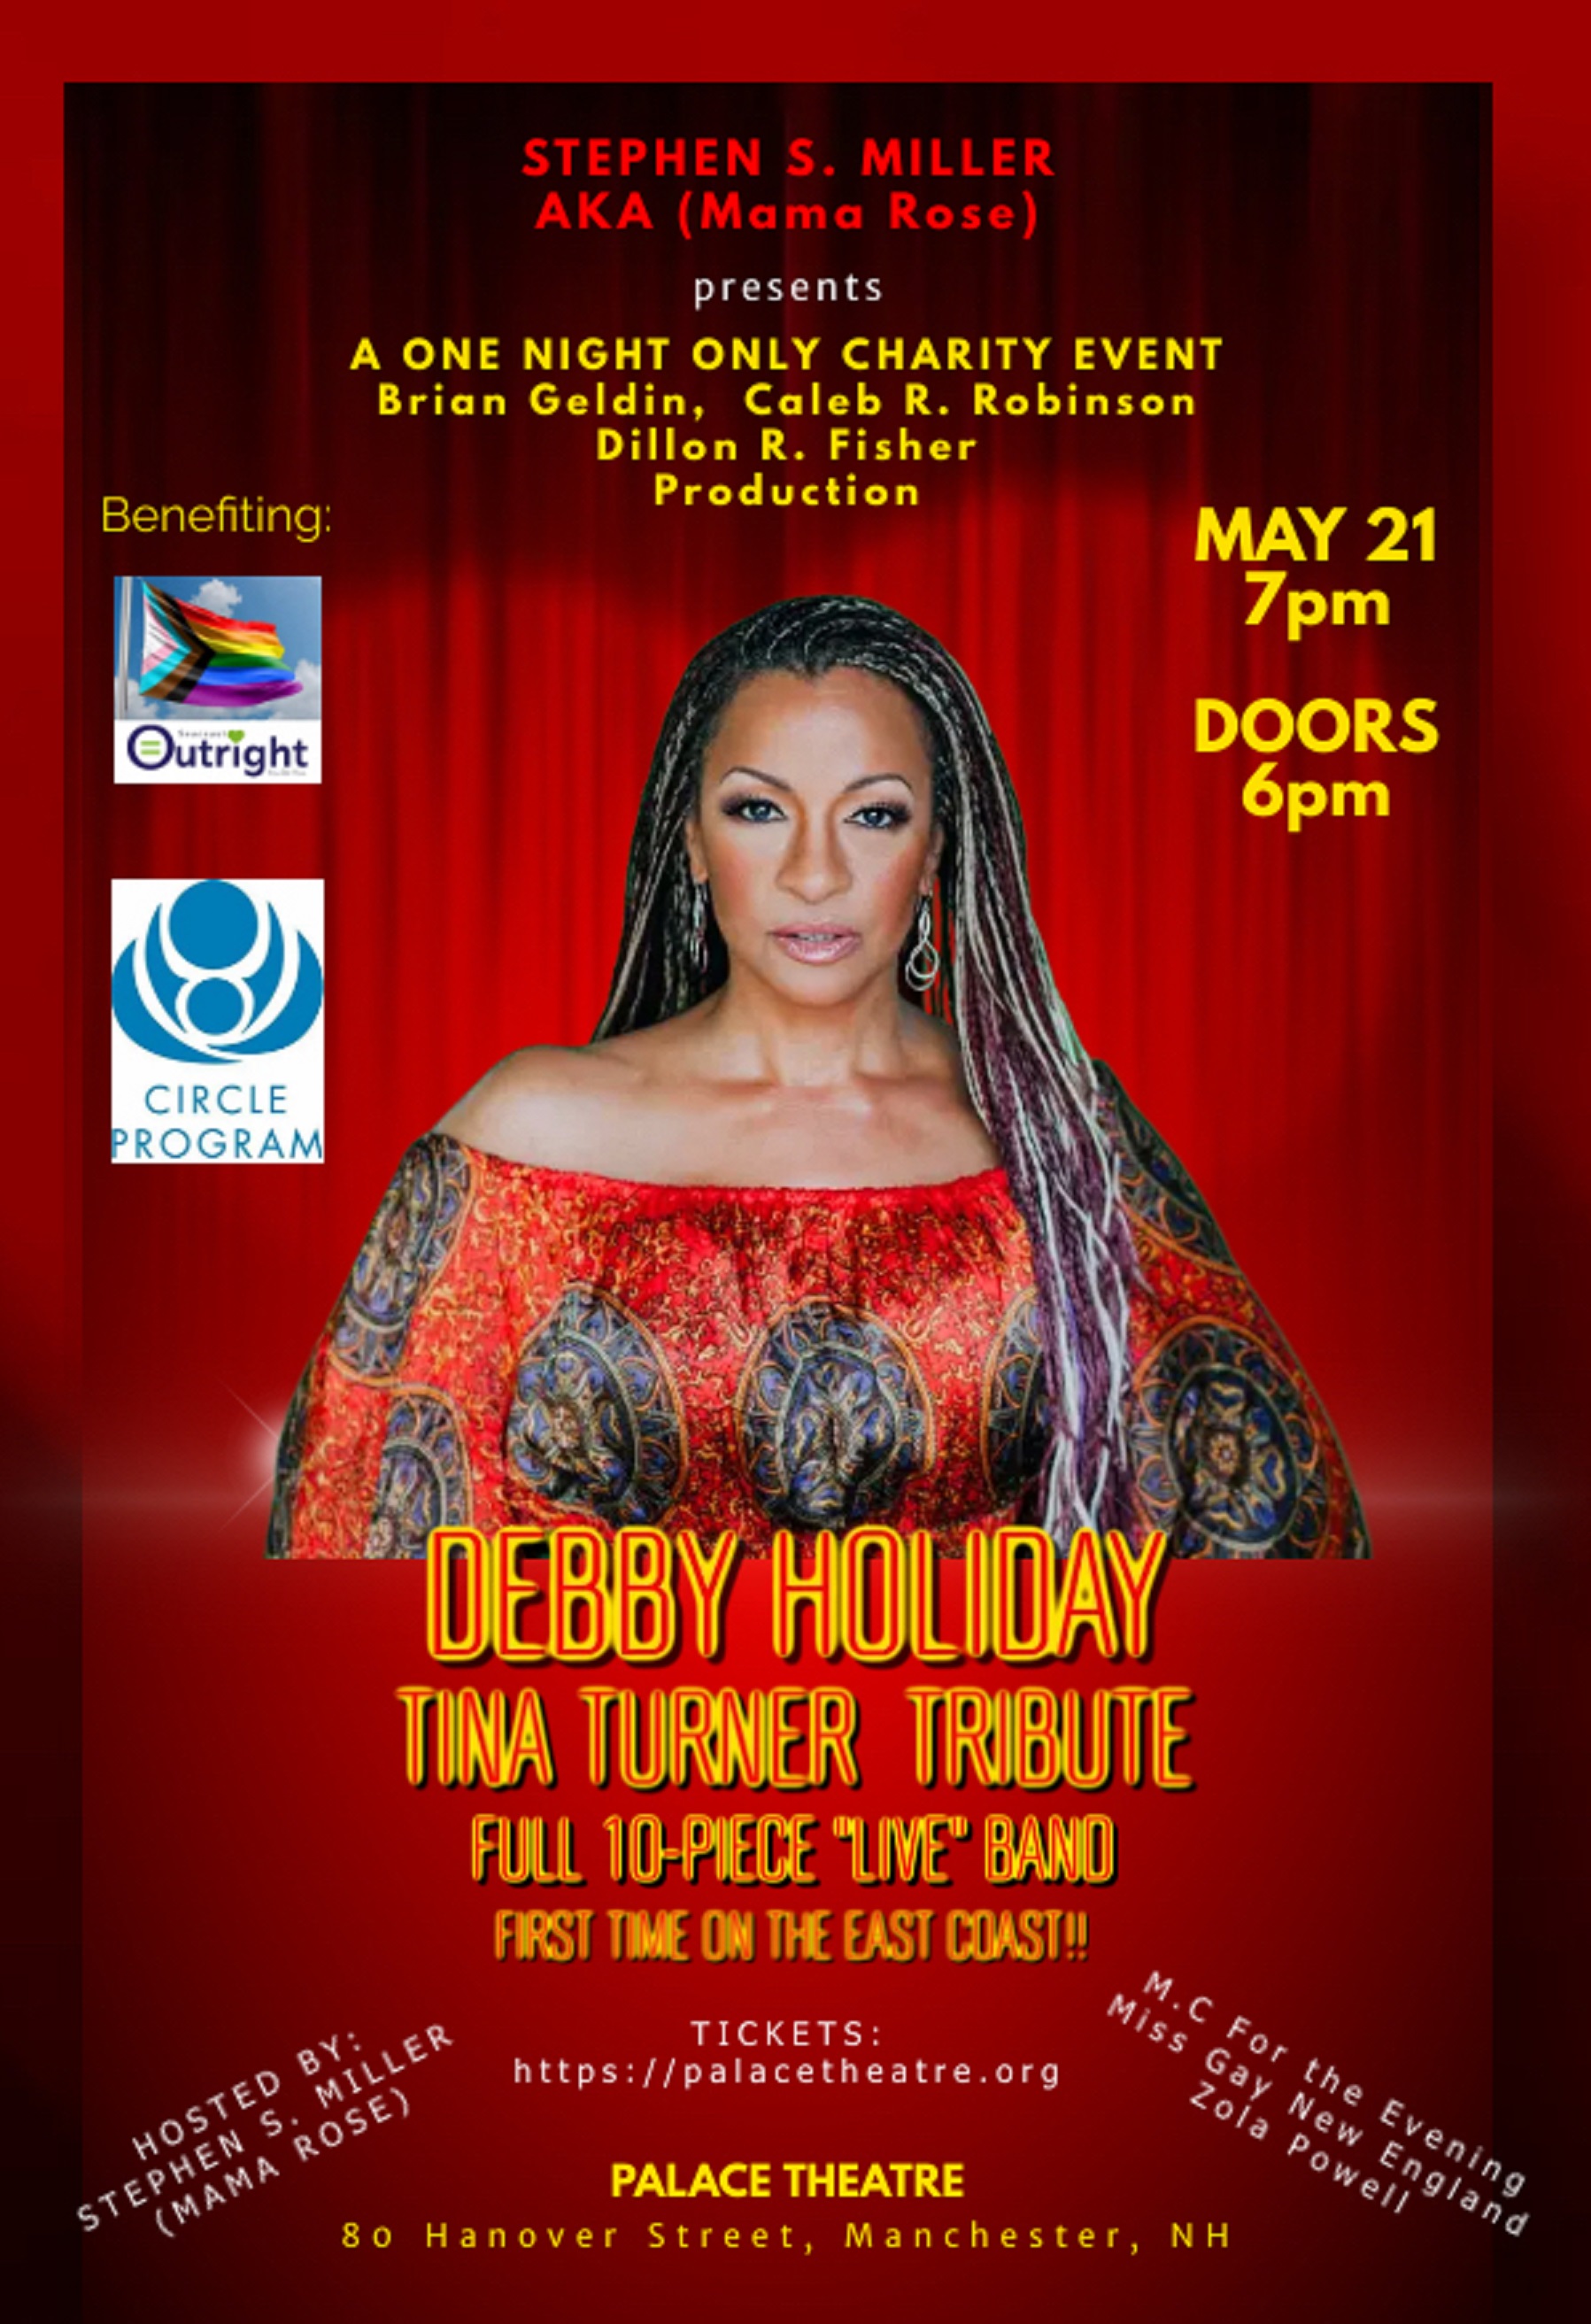 Tina Turner Tribute by Debby Holiday One-Night Only, Full 10-Piece “Live” Band, First Time on East Coast